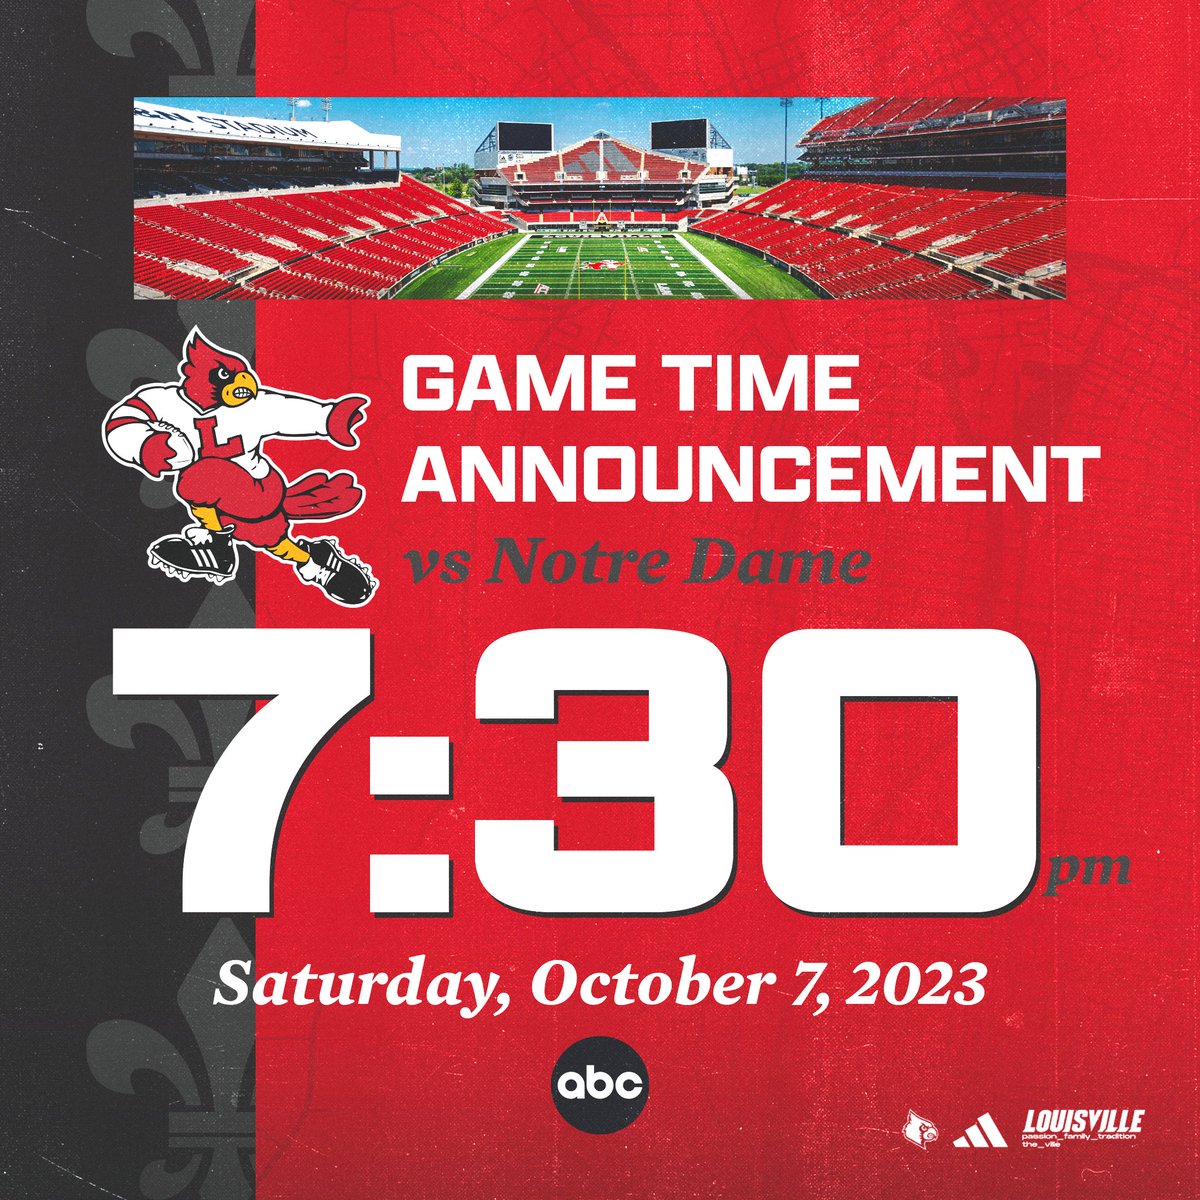 Game time is set ‼️ We will kickoff against Notre Dame at 7:30pm on ABC. #GoCards